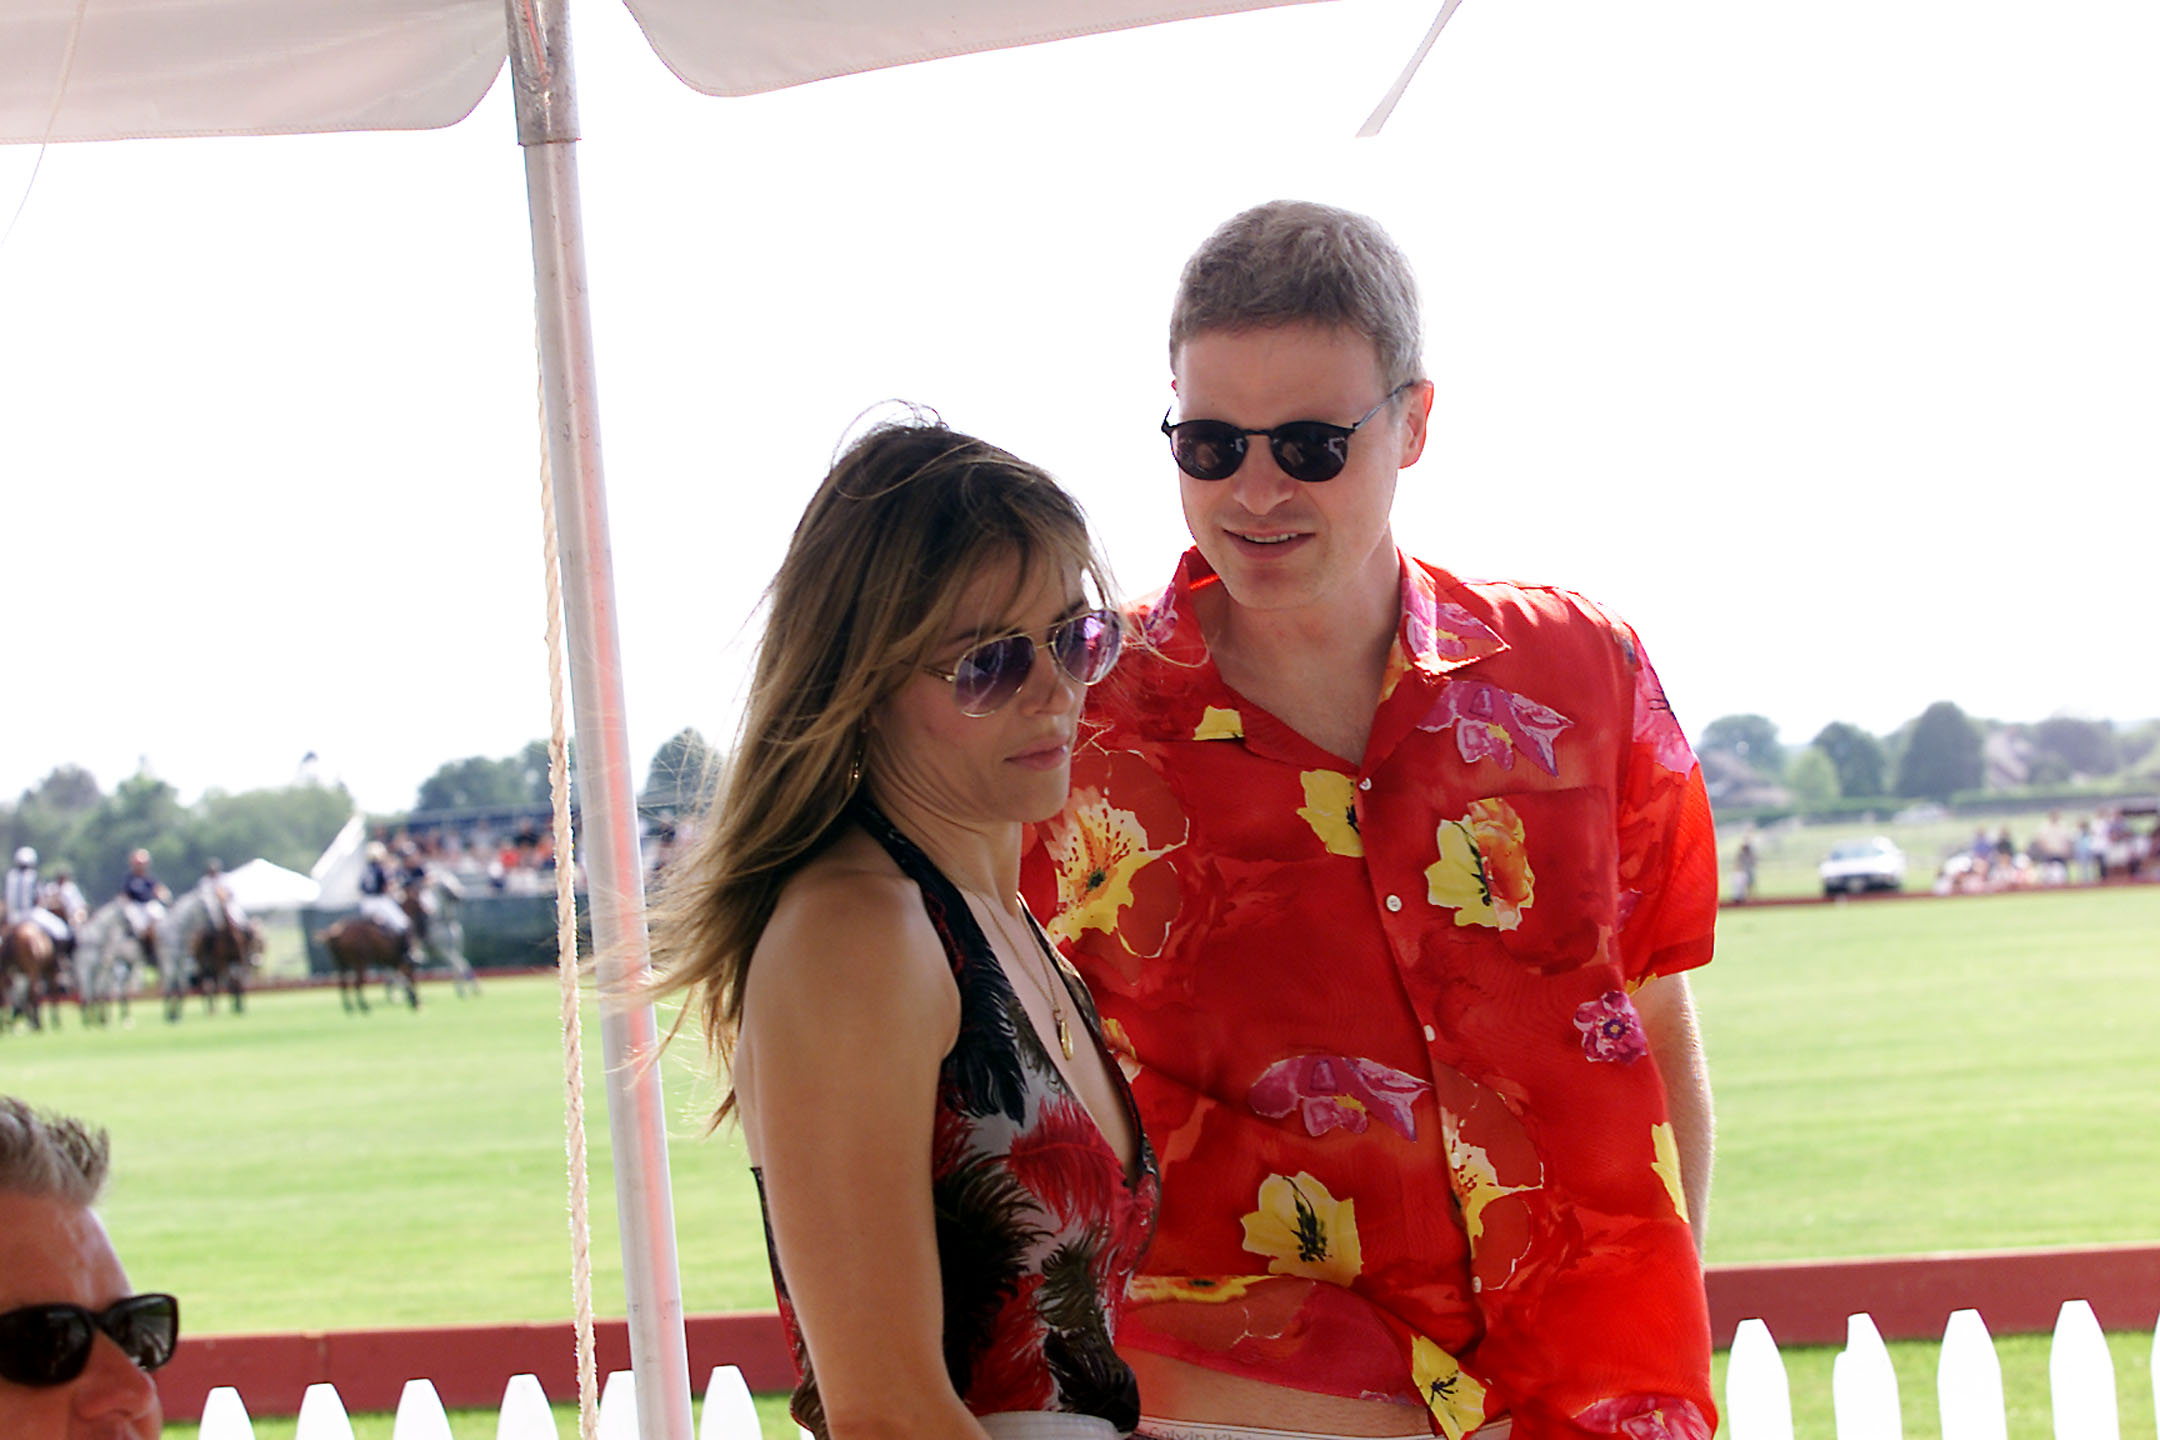 Elizabeth Hurley with Steven Bing at opening day at the Mercedes-Benz Polo Challenge at the Bridgehampton Polo Club in Bridgehampton, New York, July 14, 2001. | Source: Getty Images